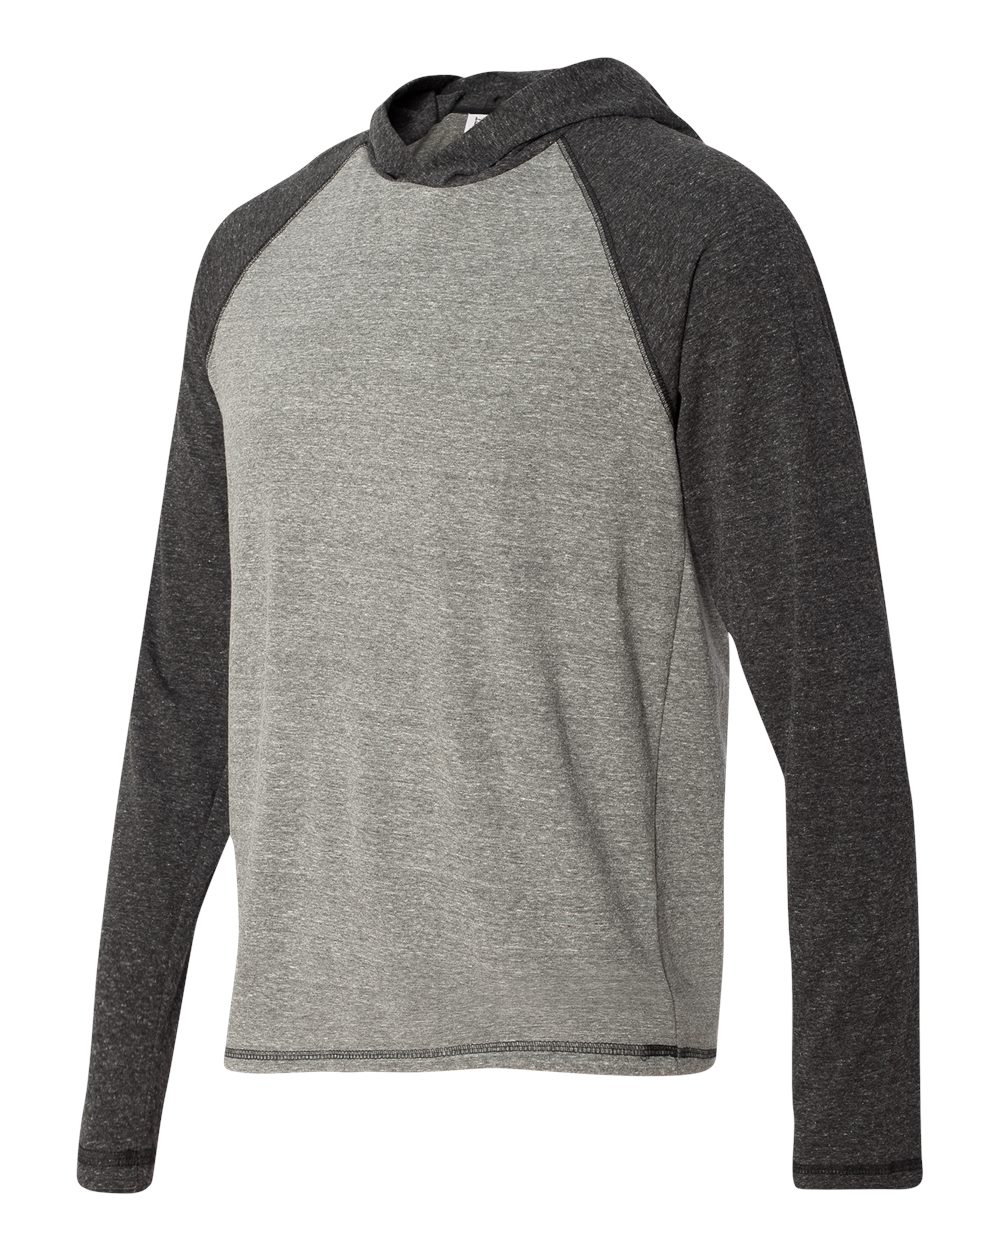 click to view Grey Heather/Charcoal Heather Triblend